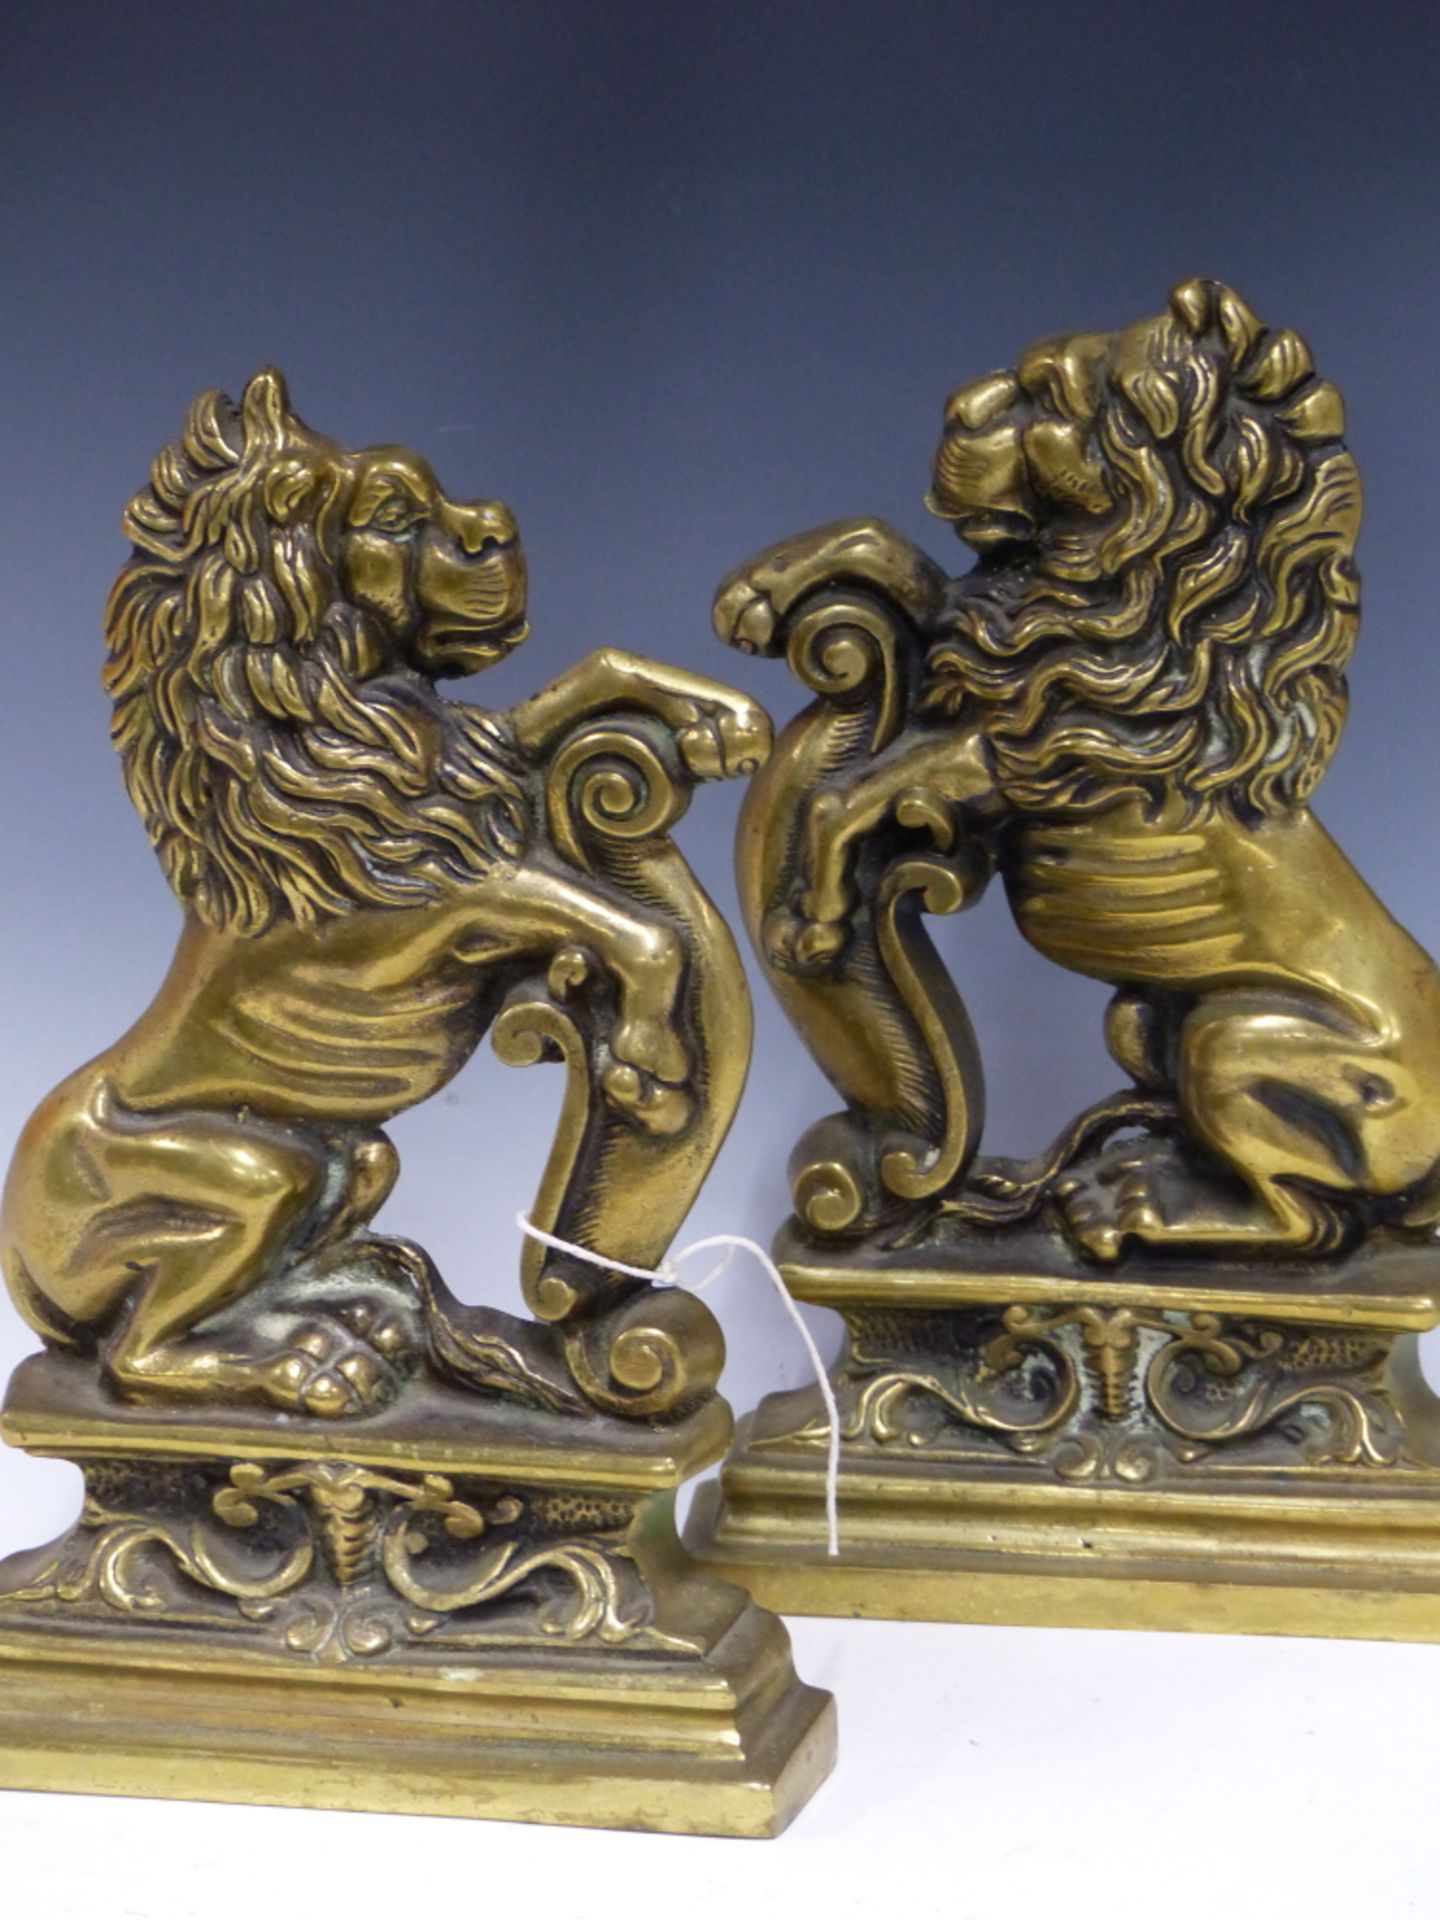 A PAIR OF ANTIQUE CAST BRASS RAMPANT LION FIRESIDE STANDS OR DOORSTOPS.